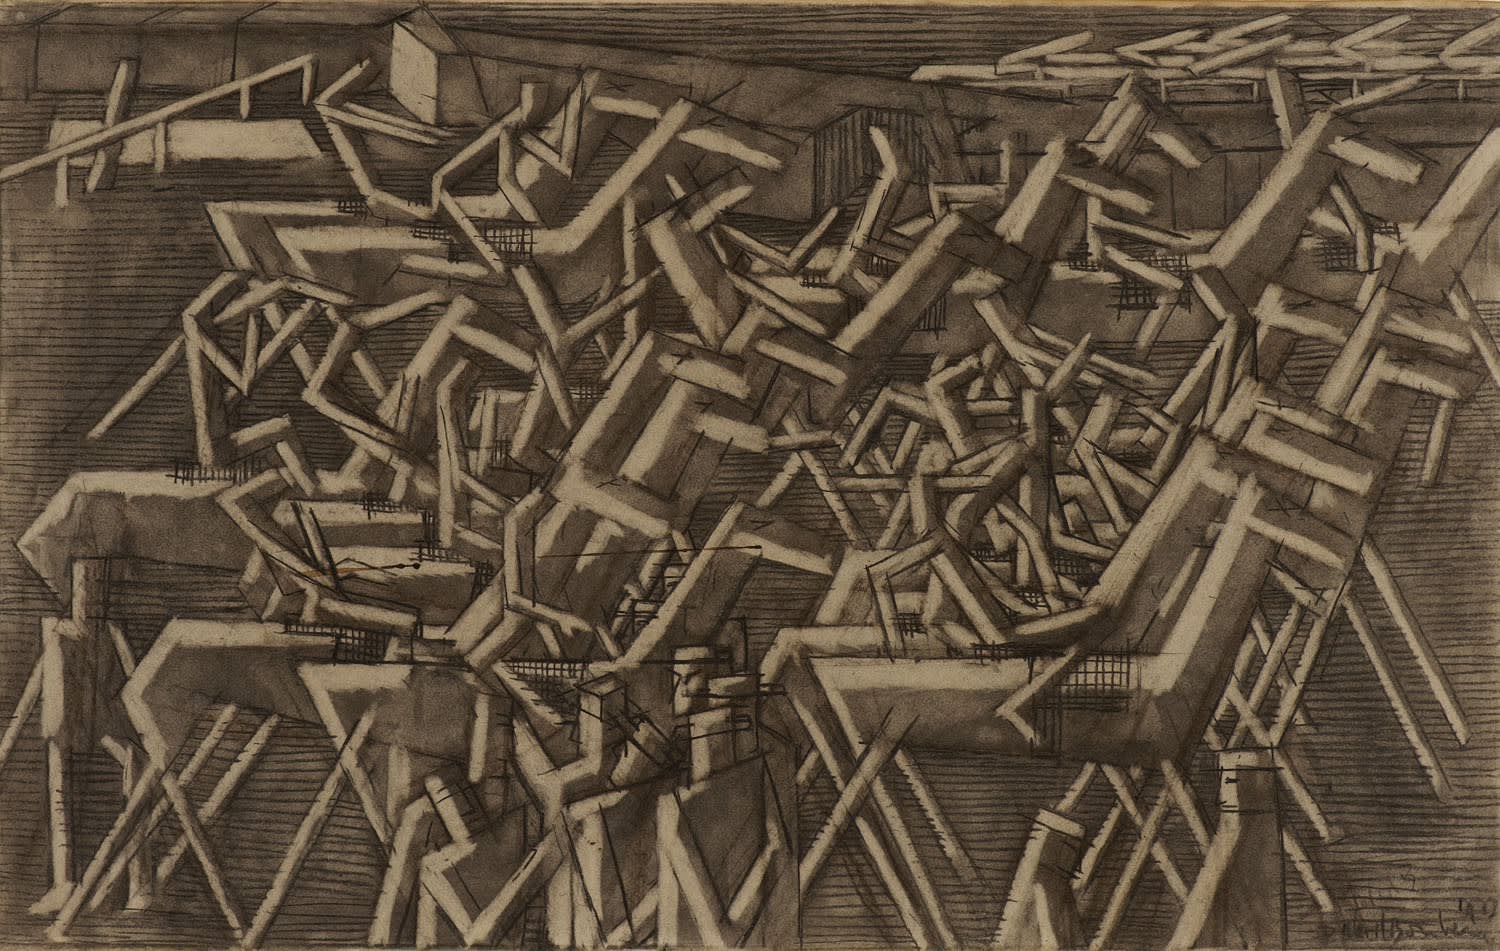 David Bomberg (1890-1957) Racehorses 1913 Black chalk and wash on paper 41.5 x 66.2 cm Ben Uri Collection © David Bomberg estate Represented in this acquisition by James Holland-Hibbert of Hazlitt Holland-Hibbert with the assistance of Art Fund, the HLF and the MLA/ V&A Purchase Grant Fund, The Julius Silman Charitable Trust, Pauline and Daniel Auerbach, Sir Michael and Lady Heller and anonymous donors, 2004